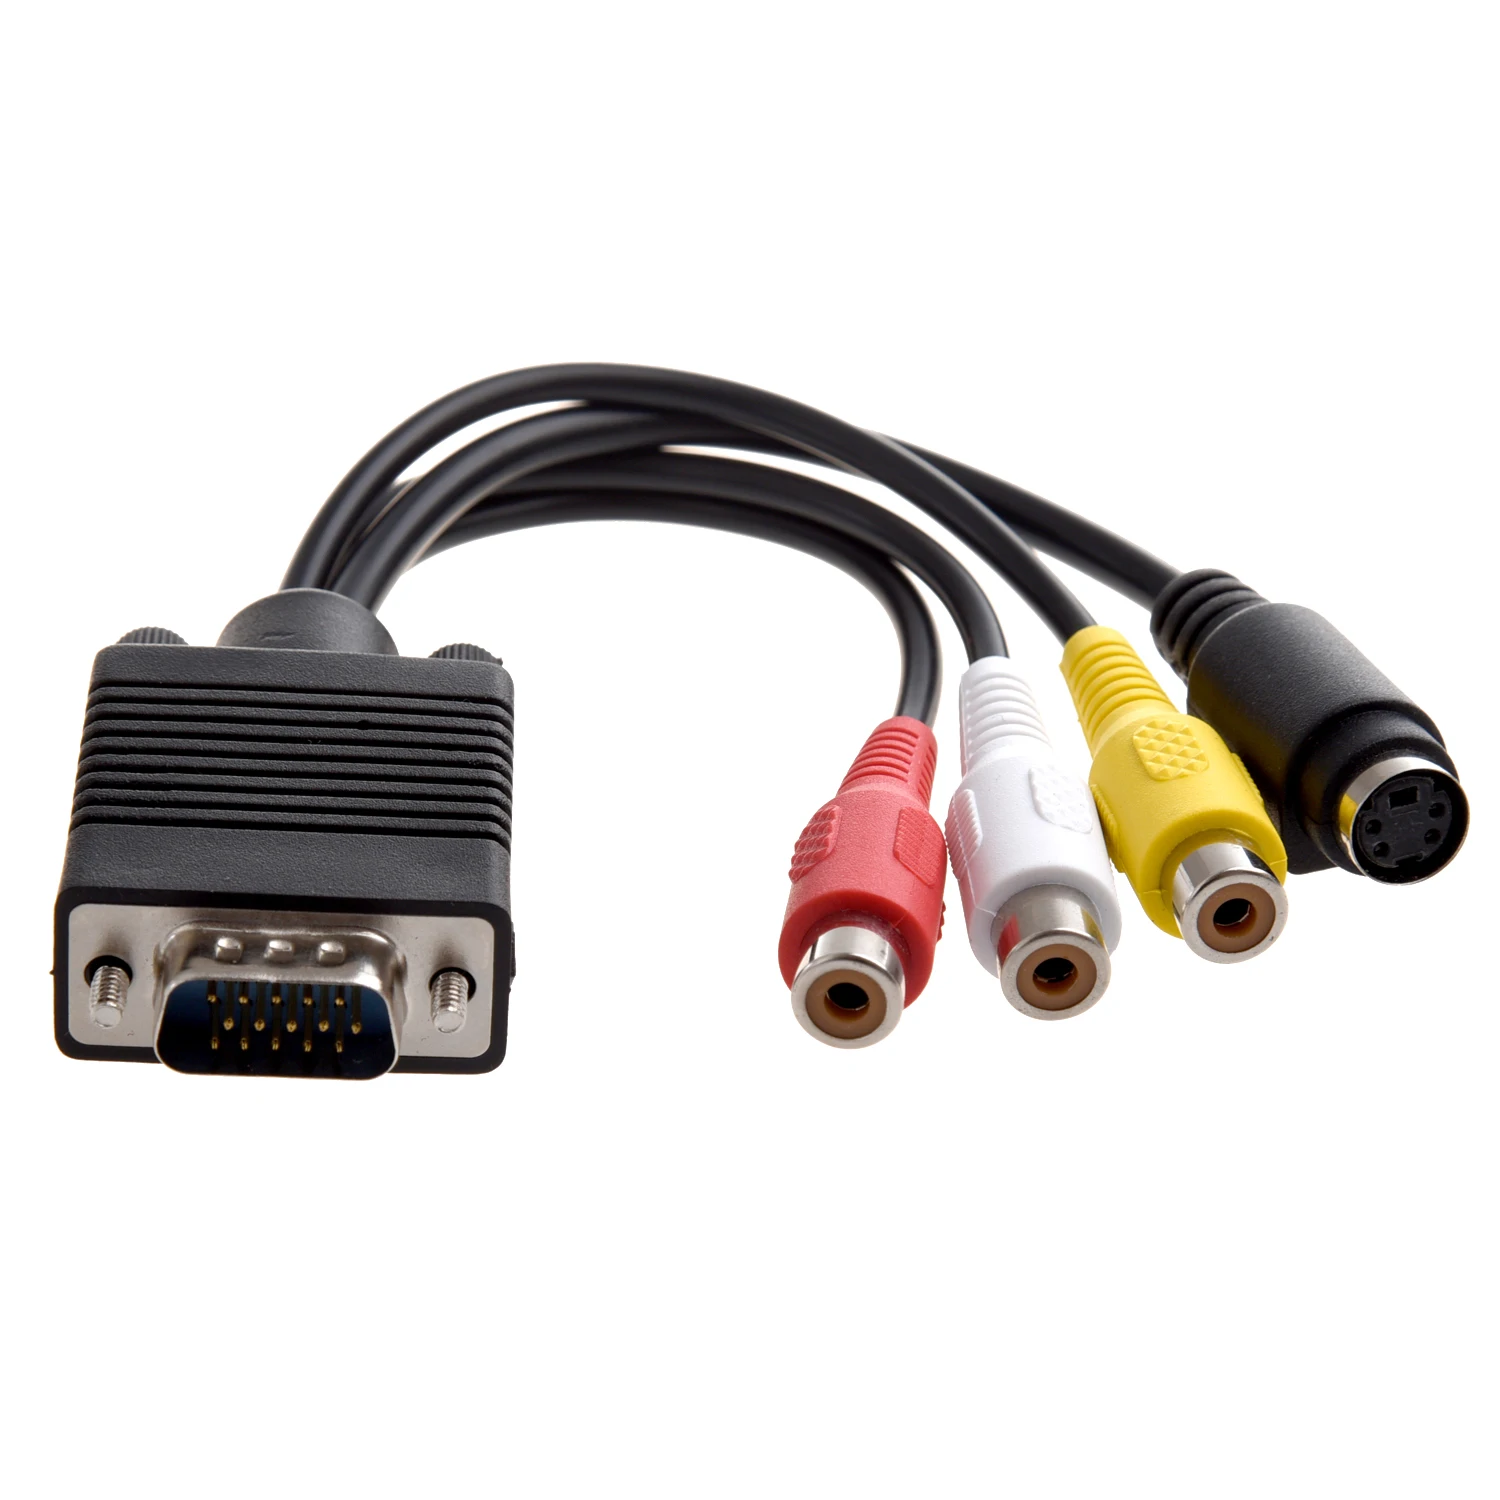 VGA to S-Video Female RCA Cable 2509 Connector Replacement for Laptop Computer TV Projector 